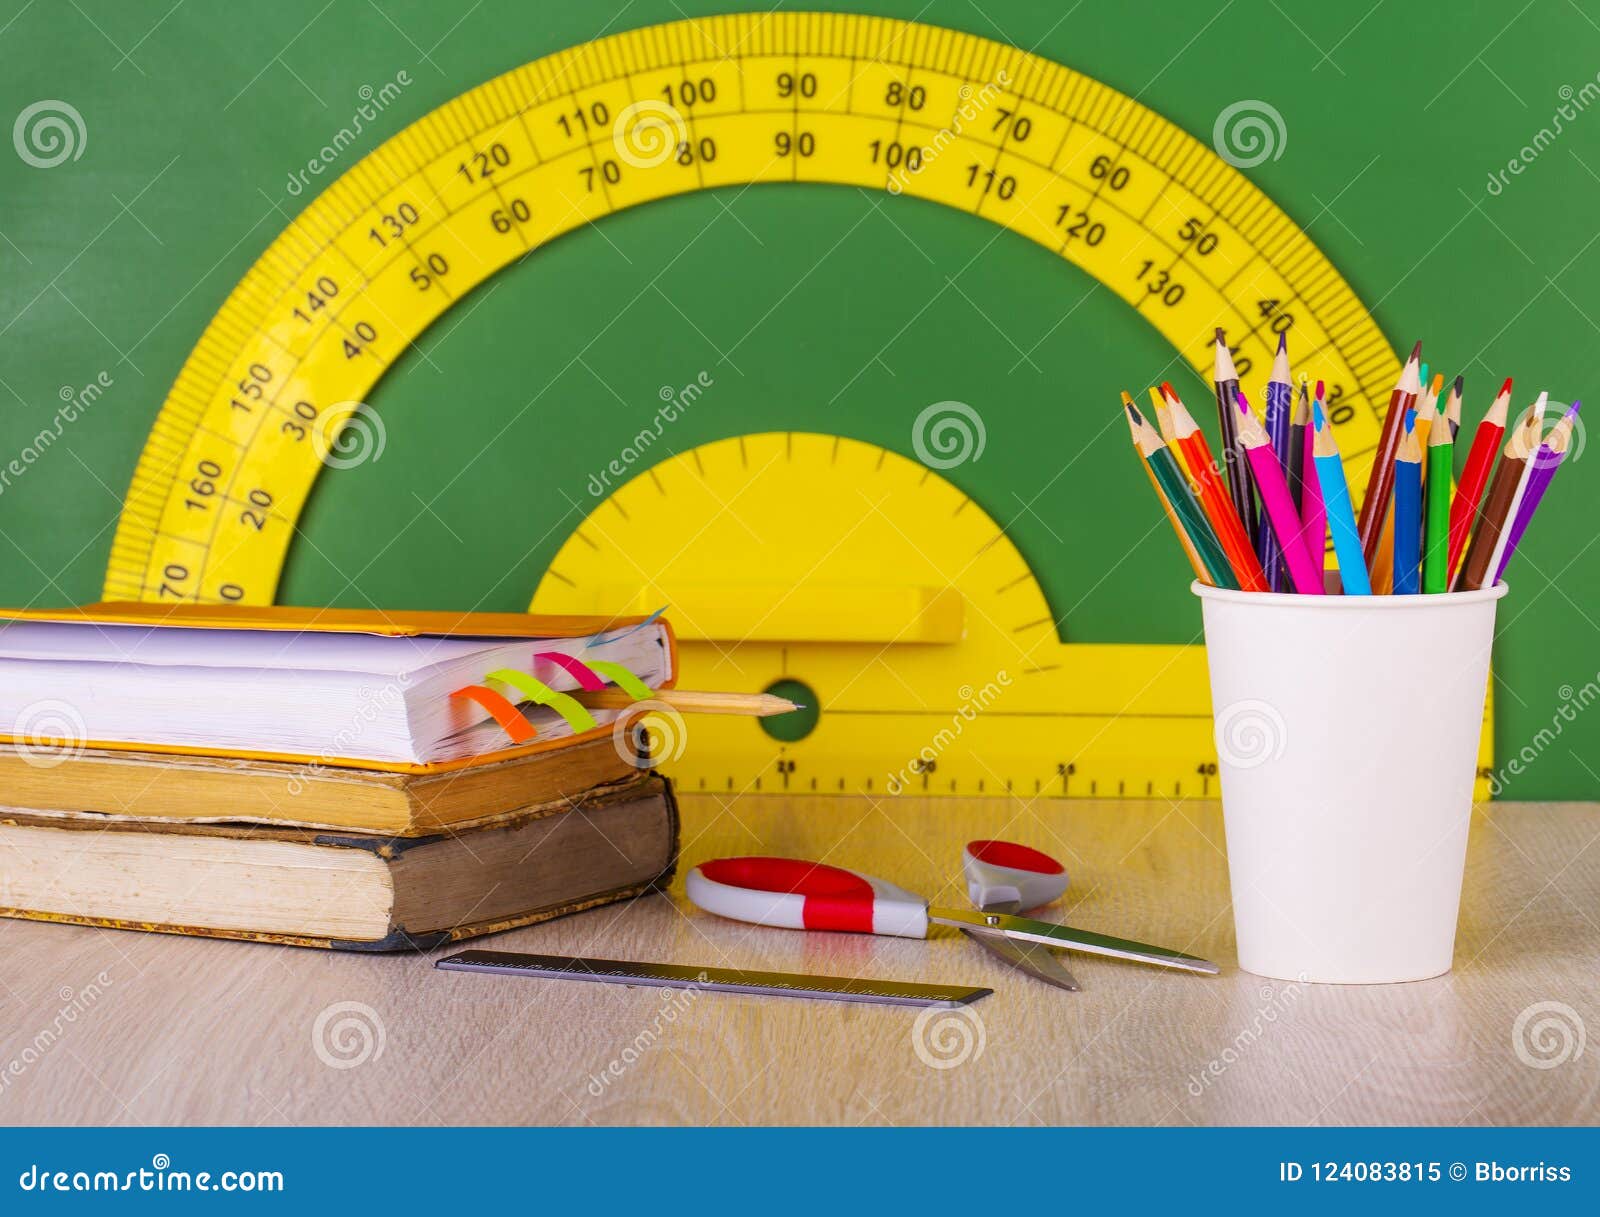 school concept: colore pencil, book, ruler, scissors and green chalkboard with yellow protractor.